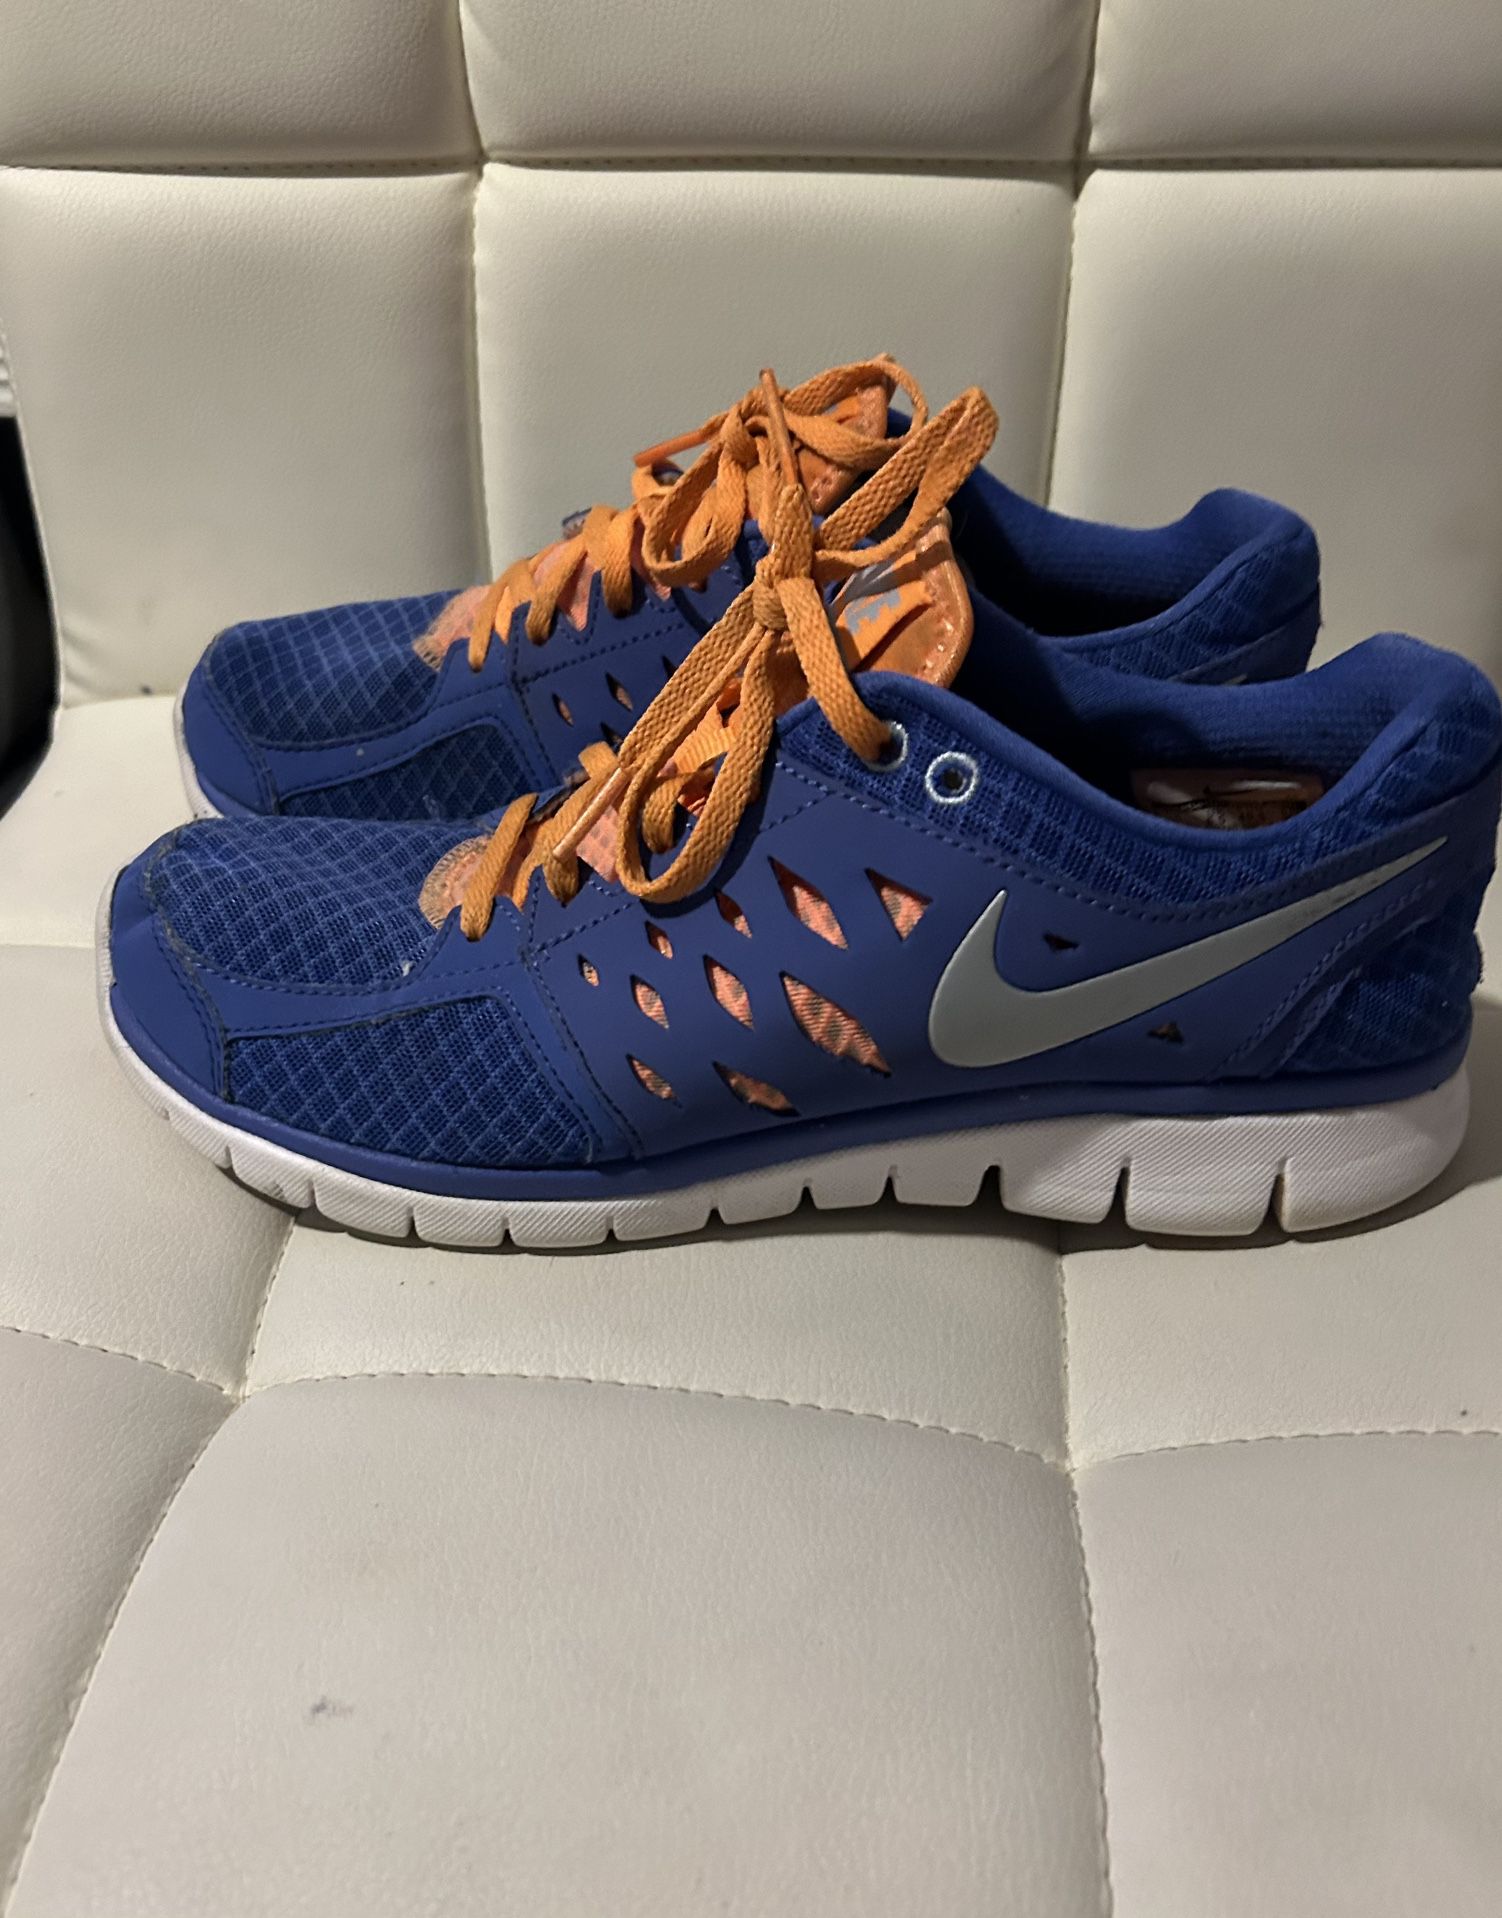 Shoes For Men’s $15 Nike